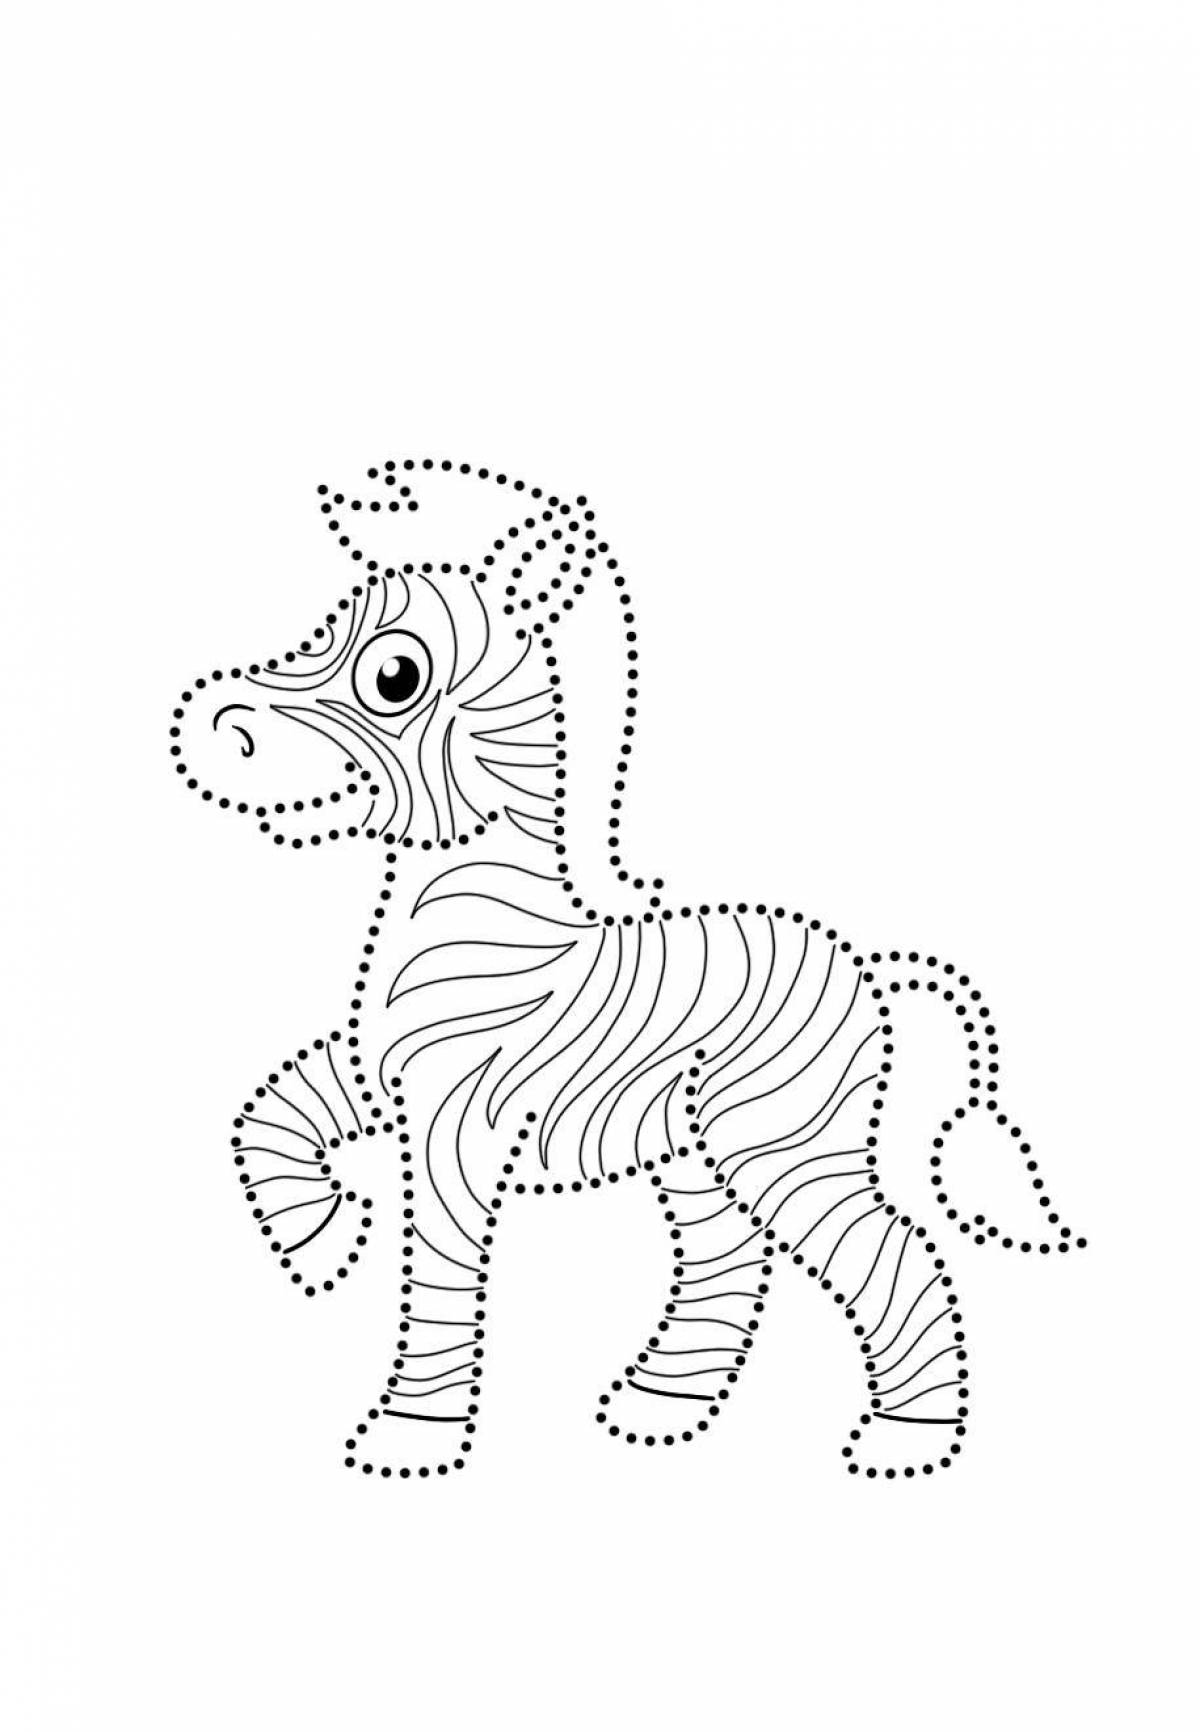 Cute animal coloring in dots